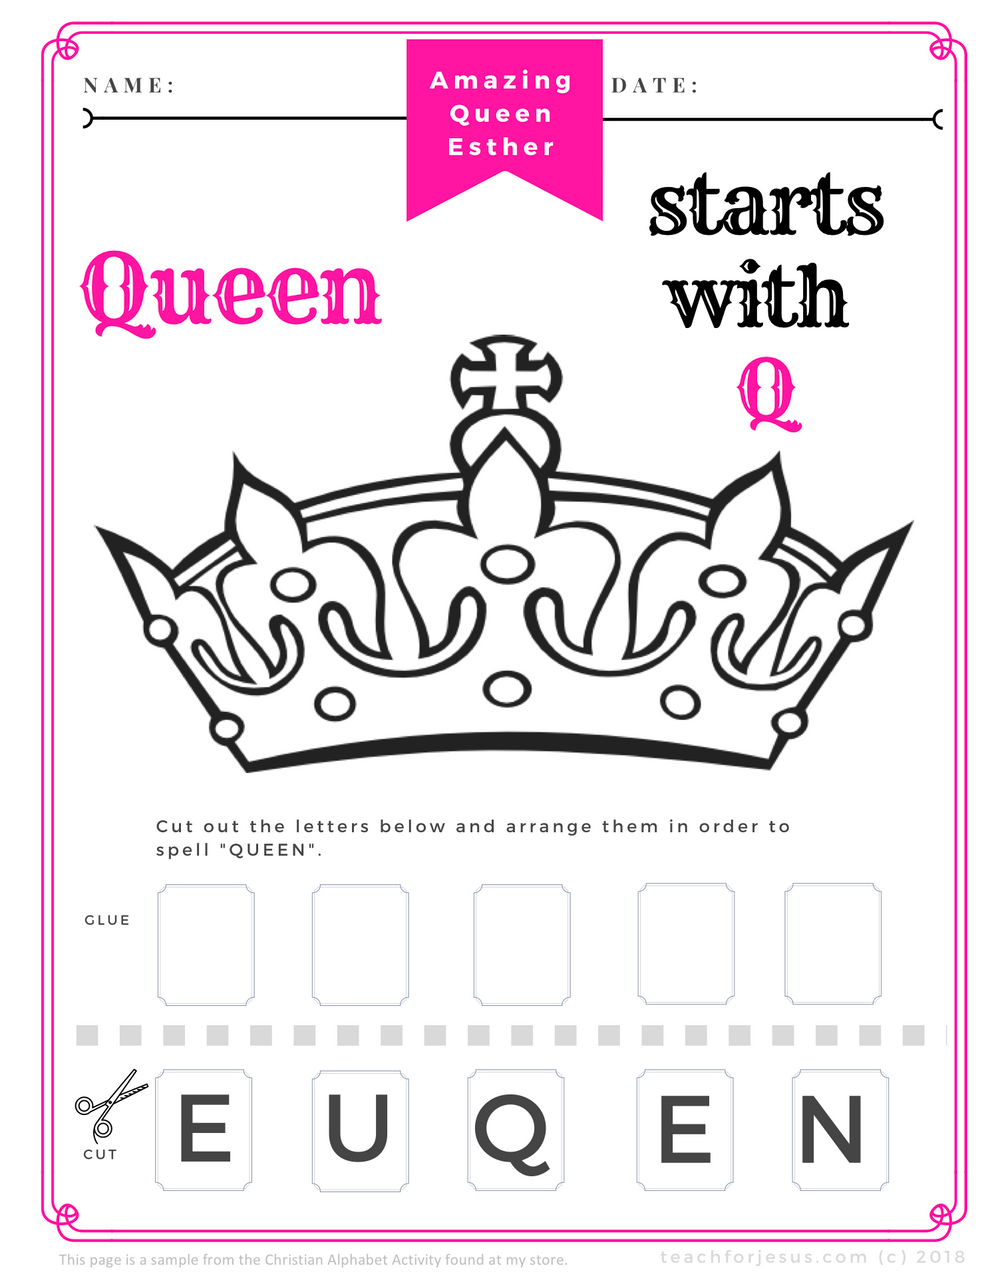 queen esther bible lesson and activities amped up learning